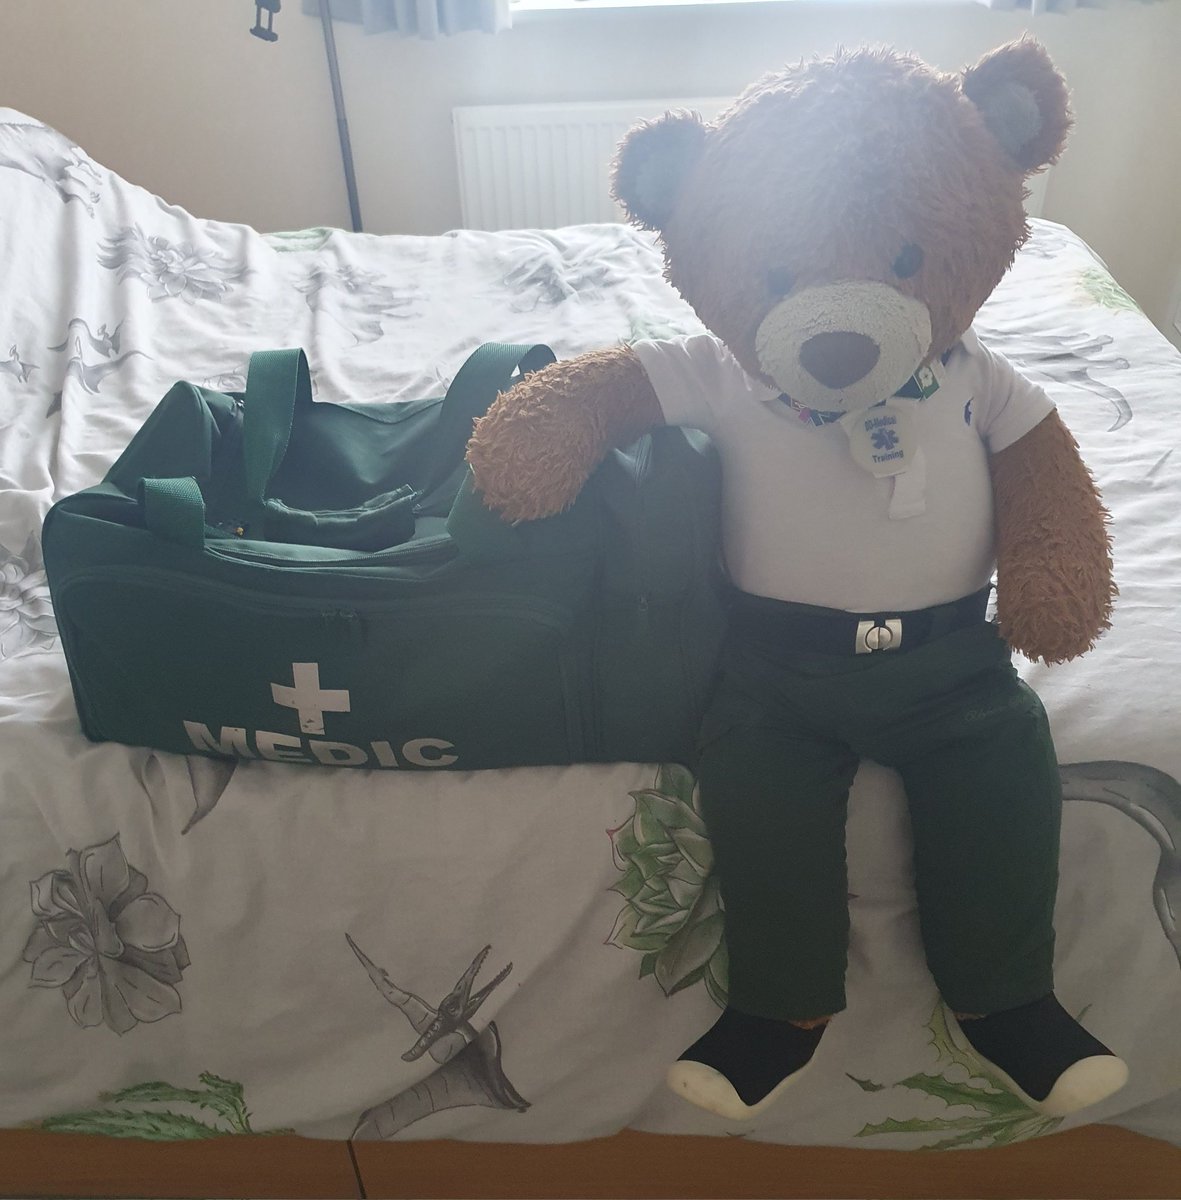 Good morning, I'm up and ready to hit the road for a couple of days of #teaching. Short week this week due to #bankholiday. Hope everyone has a wonderful end to the week - not long till the weekend now! #bearswithjobs #teachingyoutosavelives #roadtrip #MentalHealthMatters